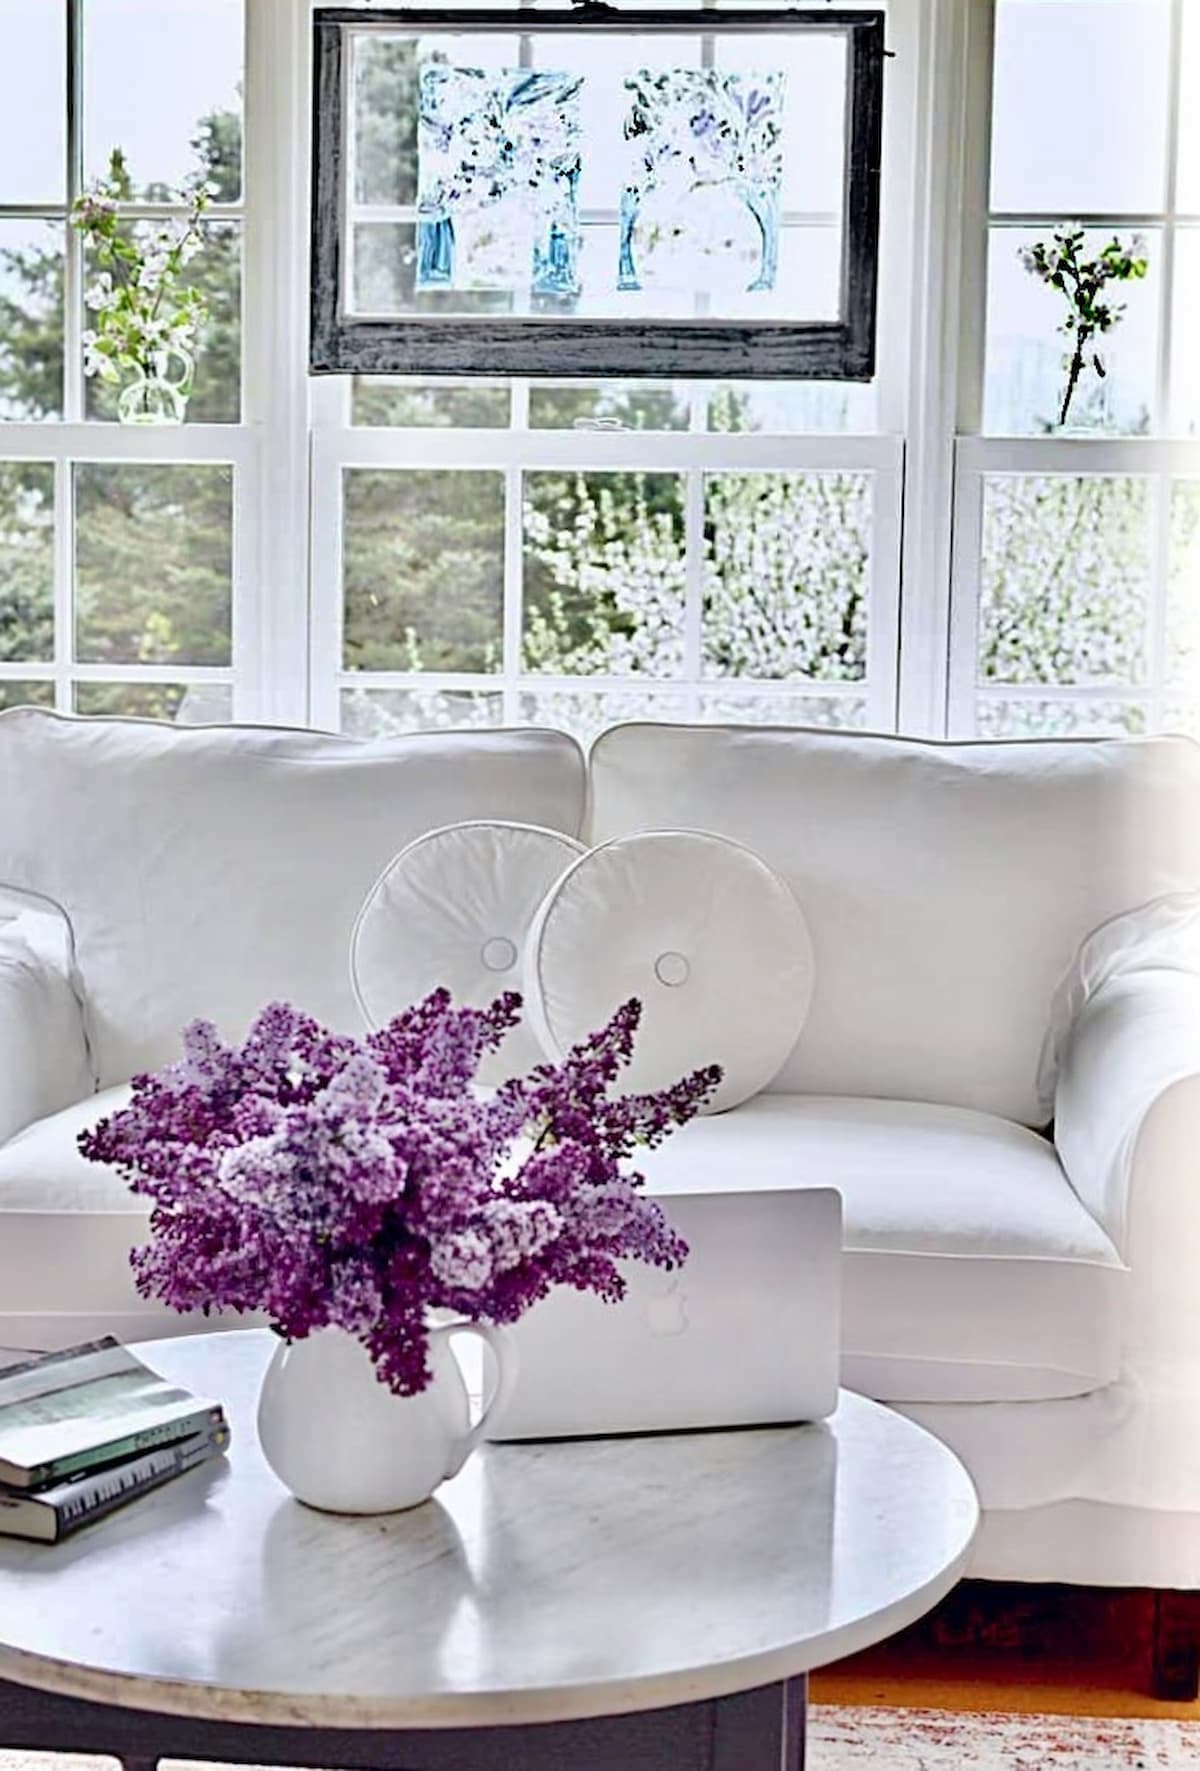 Vintage Room sunroom with lilacs and white furnishings